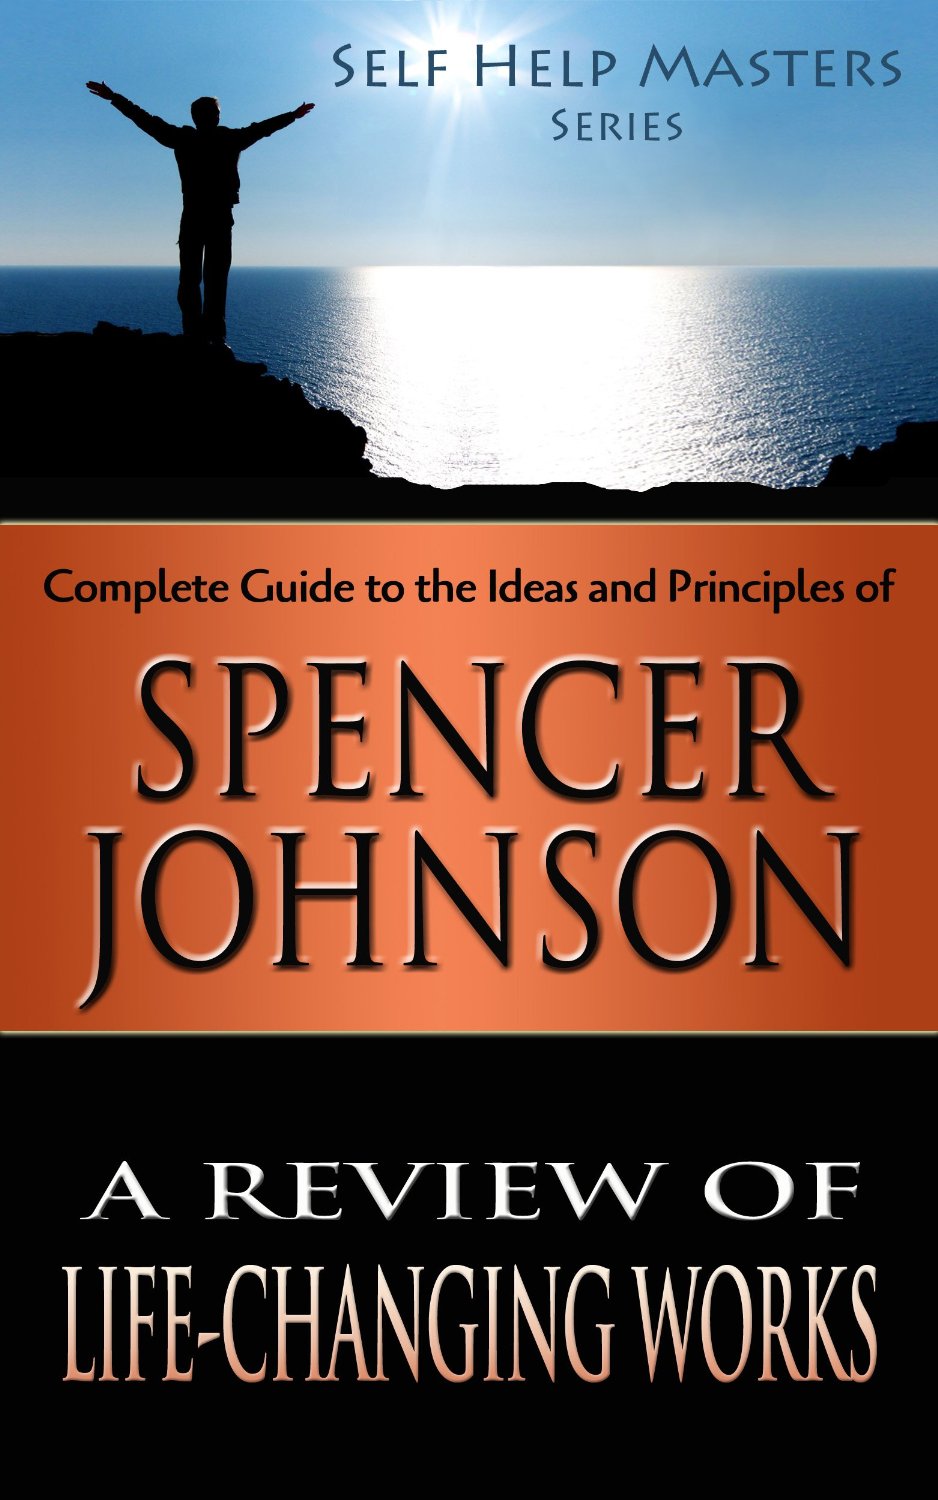 Self Help Masters – Spencer Johnson: A Review of Life Changing Works by Sid Akula